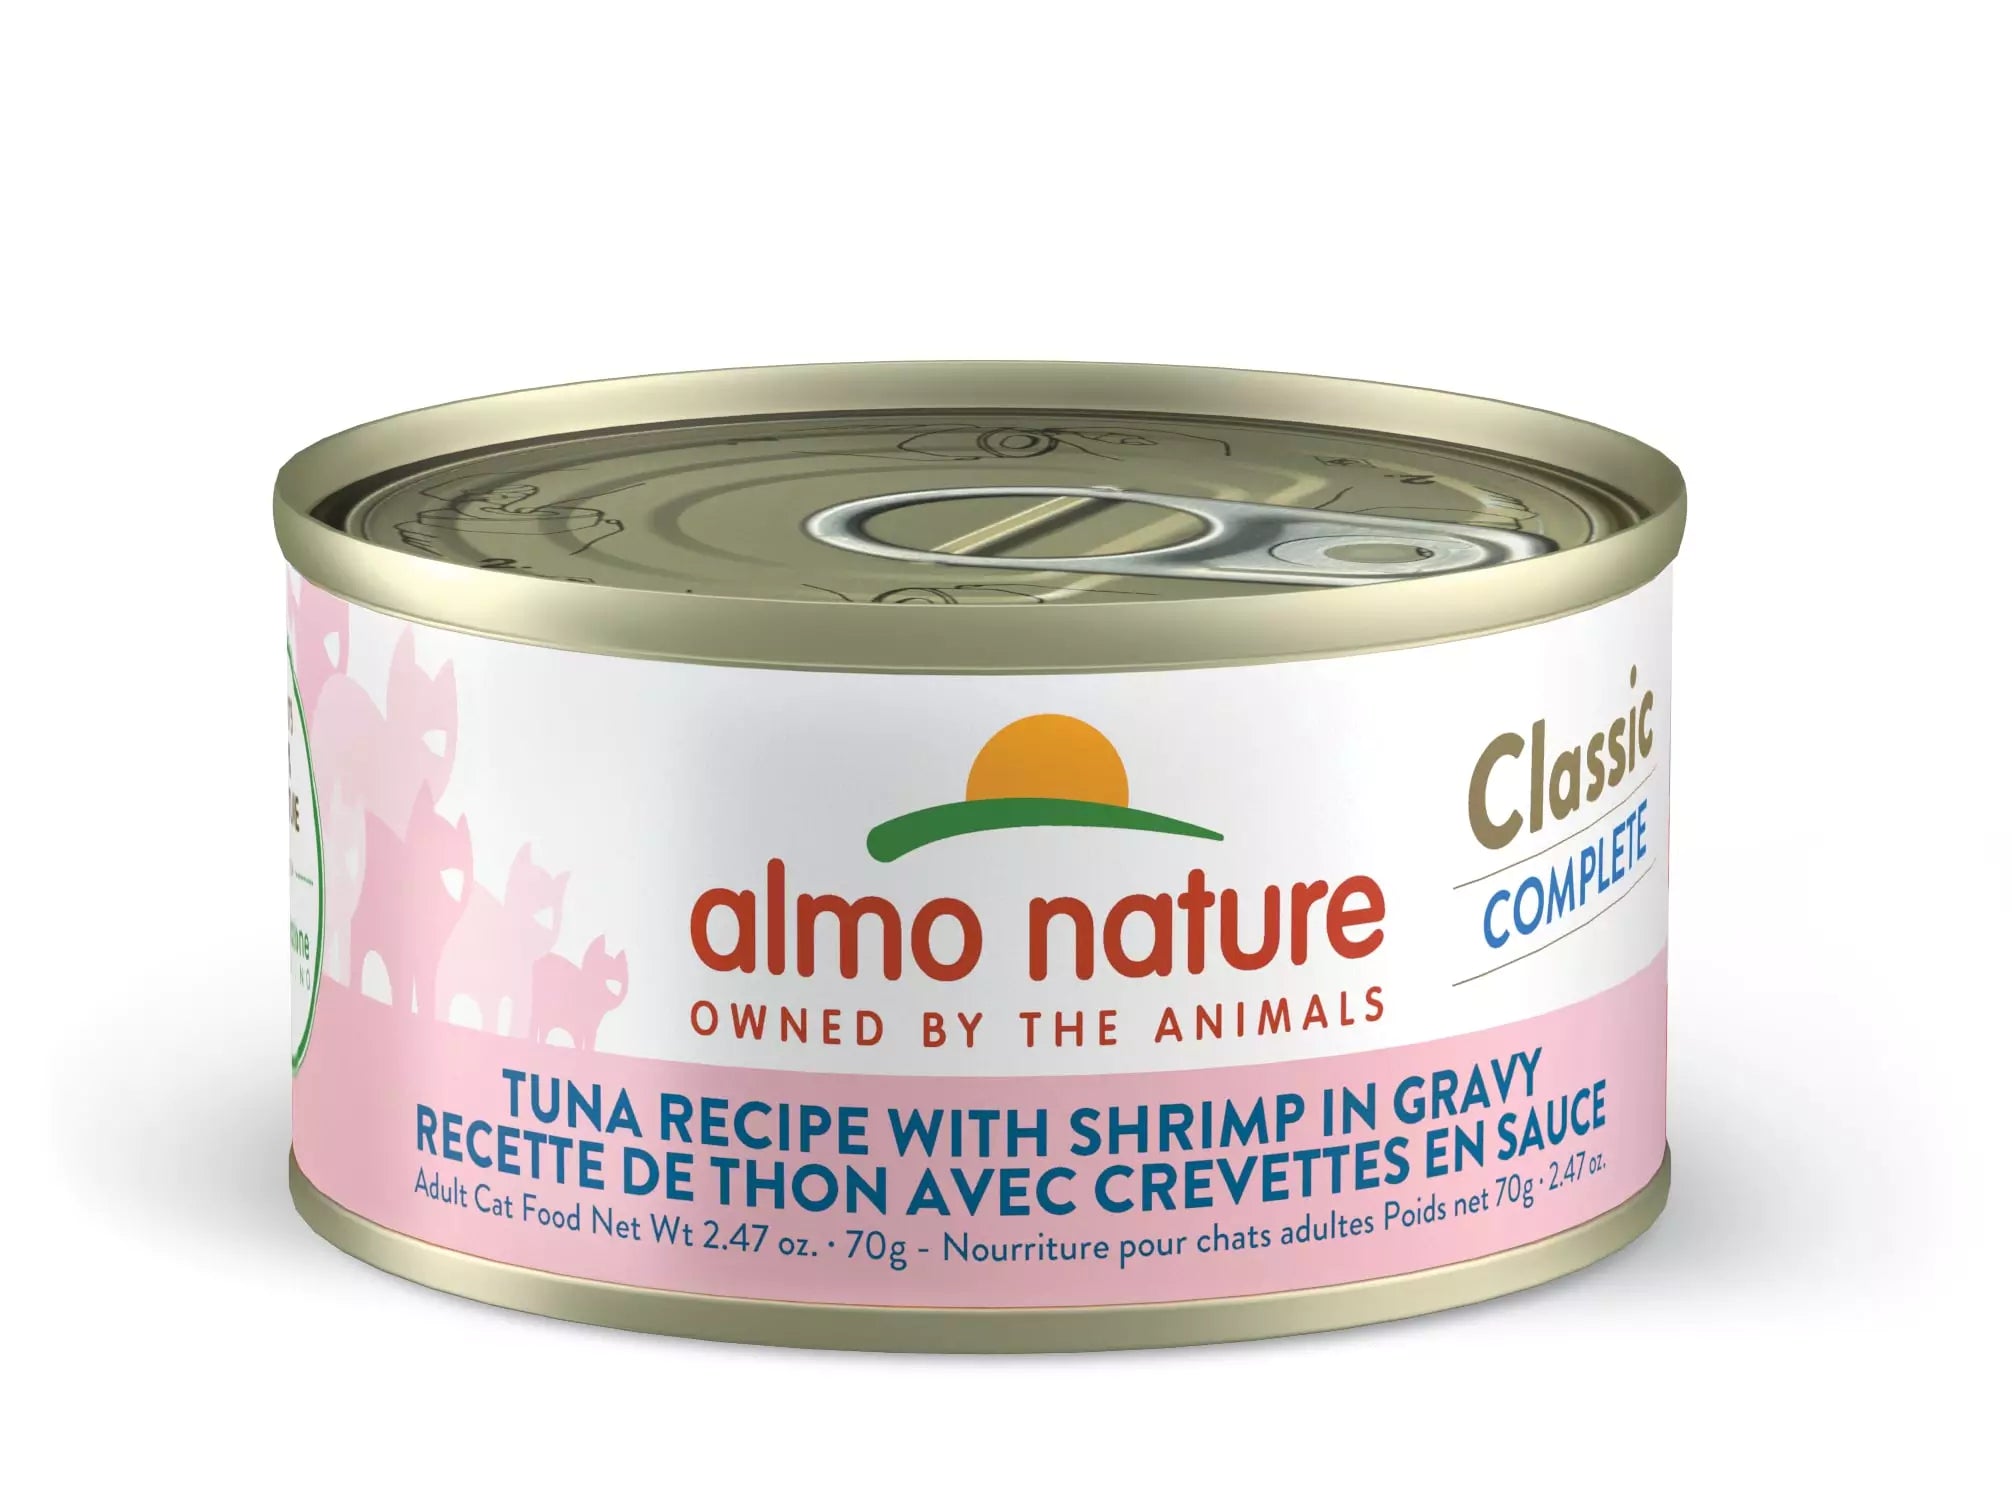 Almo Nature -Classic Complete - Tuna With Shrimp in Gravy (Wet Cat Food)